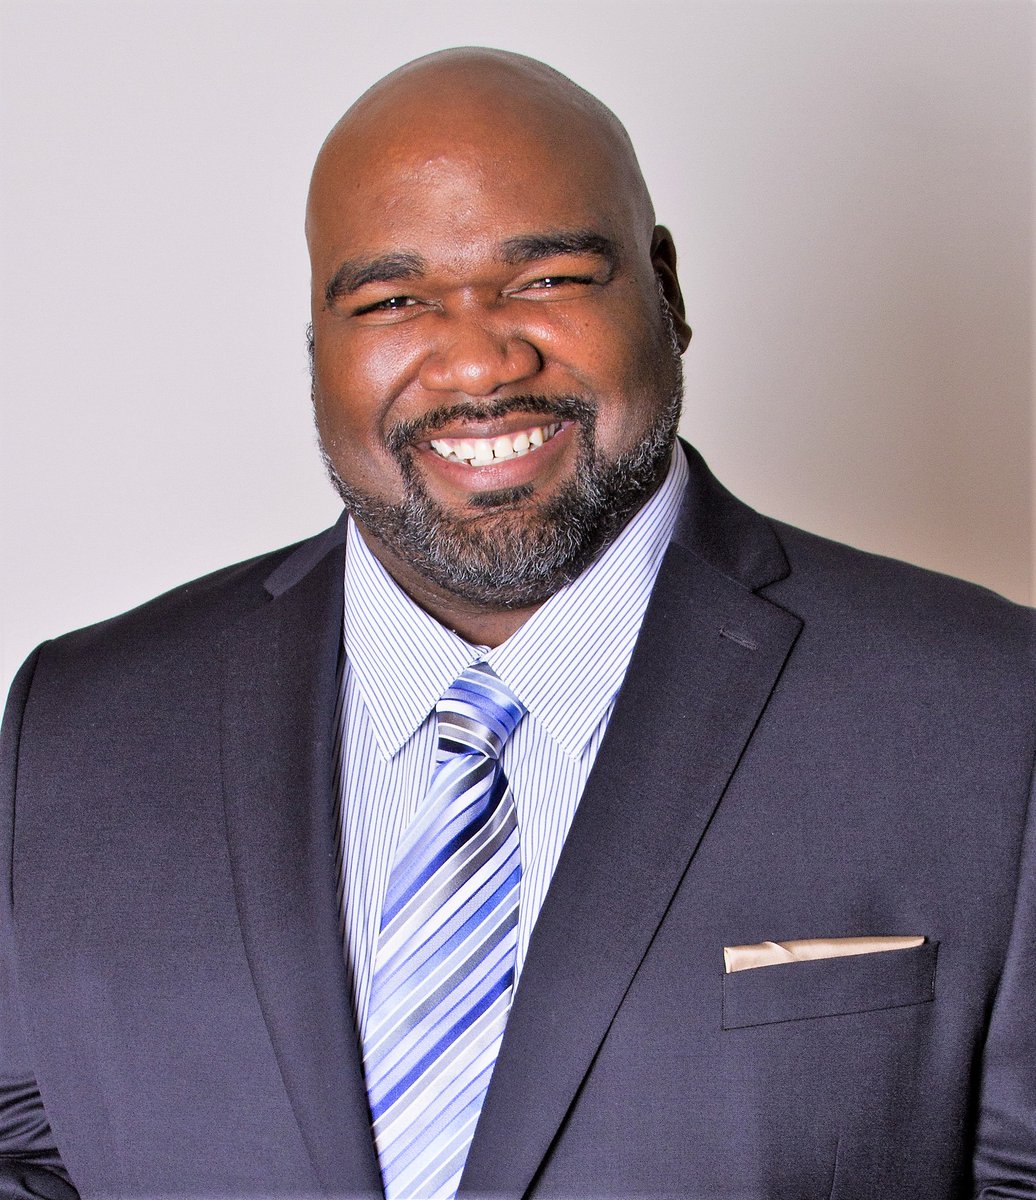 Don't forget to join Cyber Leadership and Strategy Solutions Founder Keyaan Williams as he leads tomorrow's complimentary 'Remote & Secure' cybersecurity webinar for fellow Members!

#Cybersecurity #OngoingEducation #ClubLifeTogether